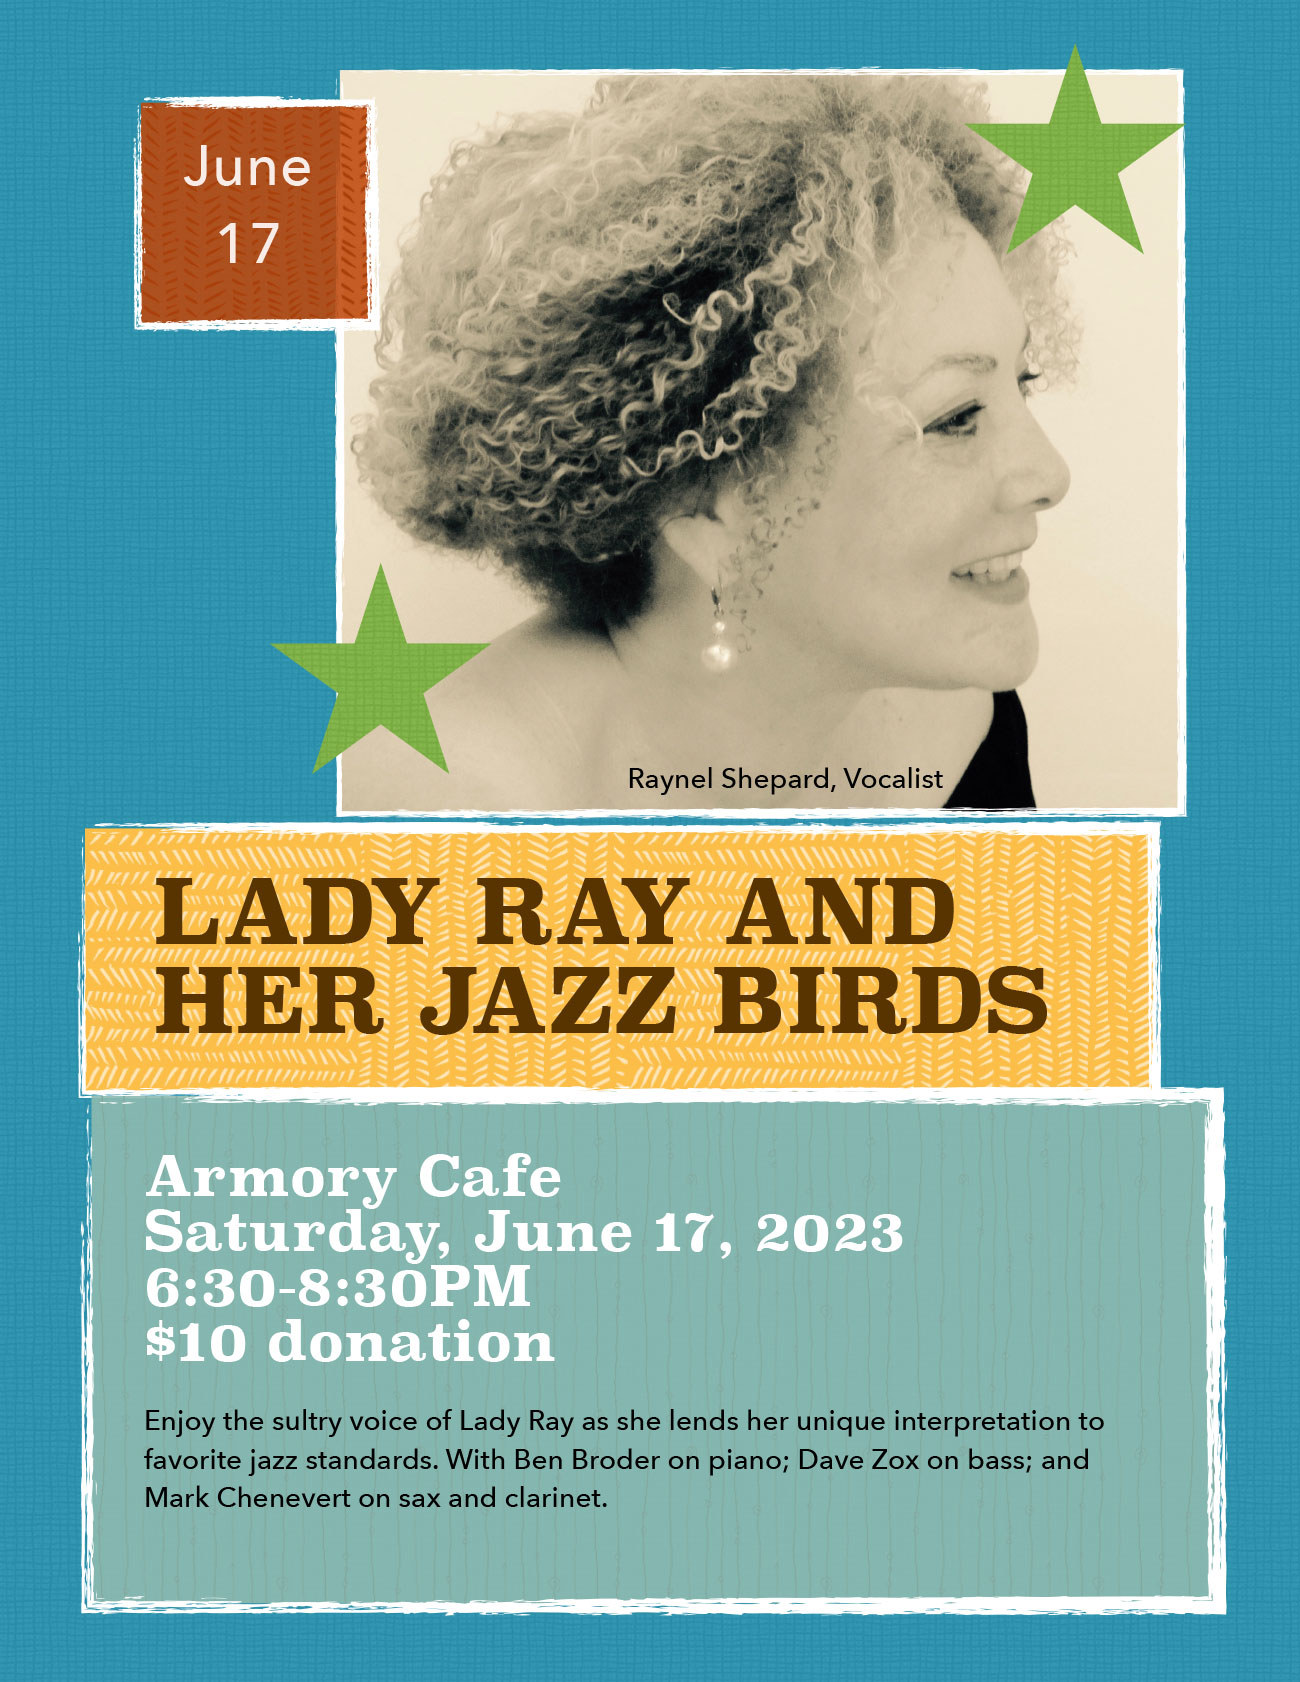 Lady Ray and her Jazz Birds